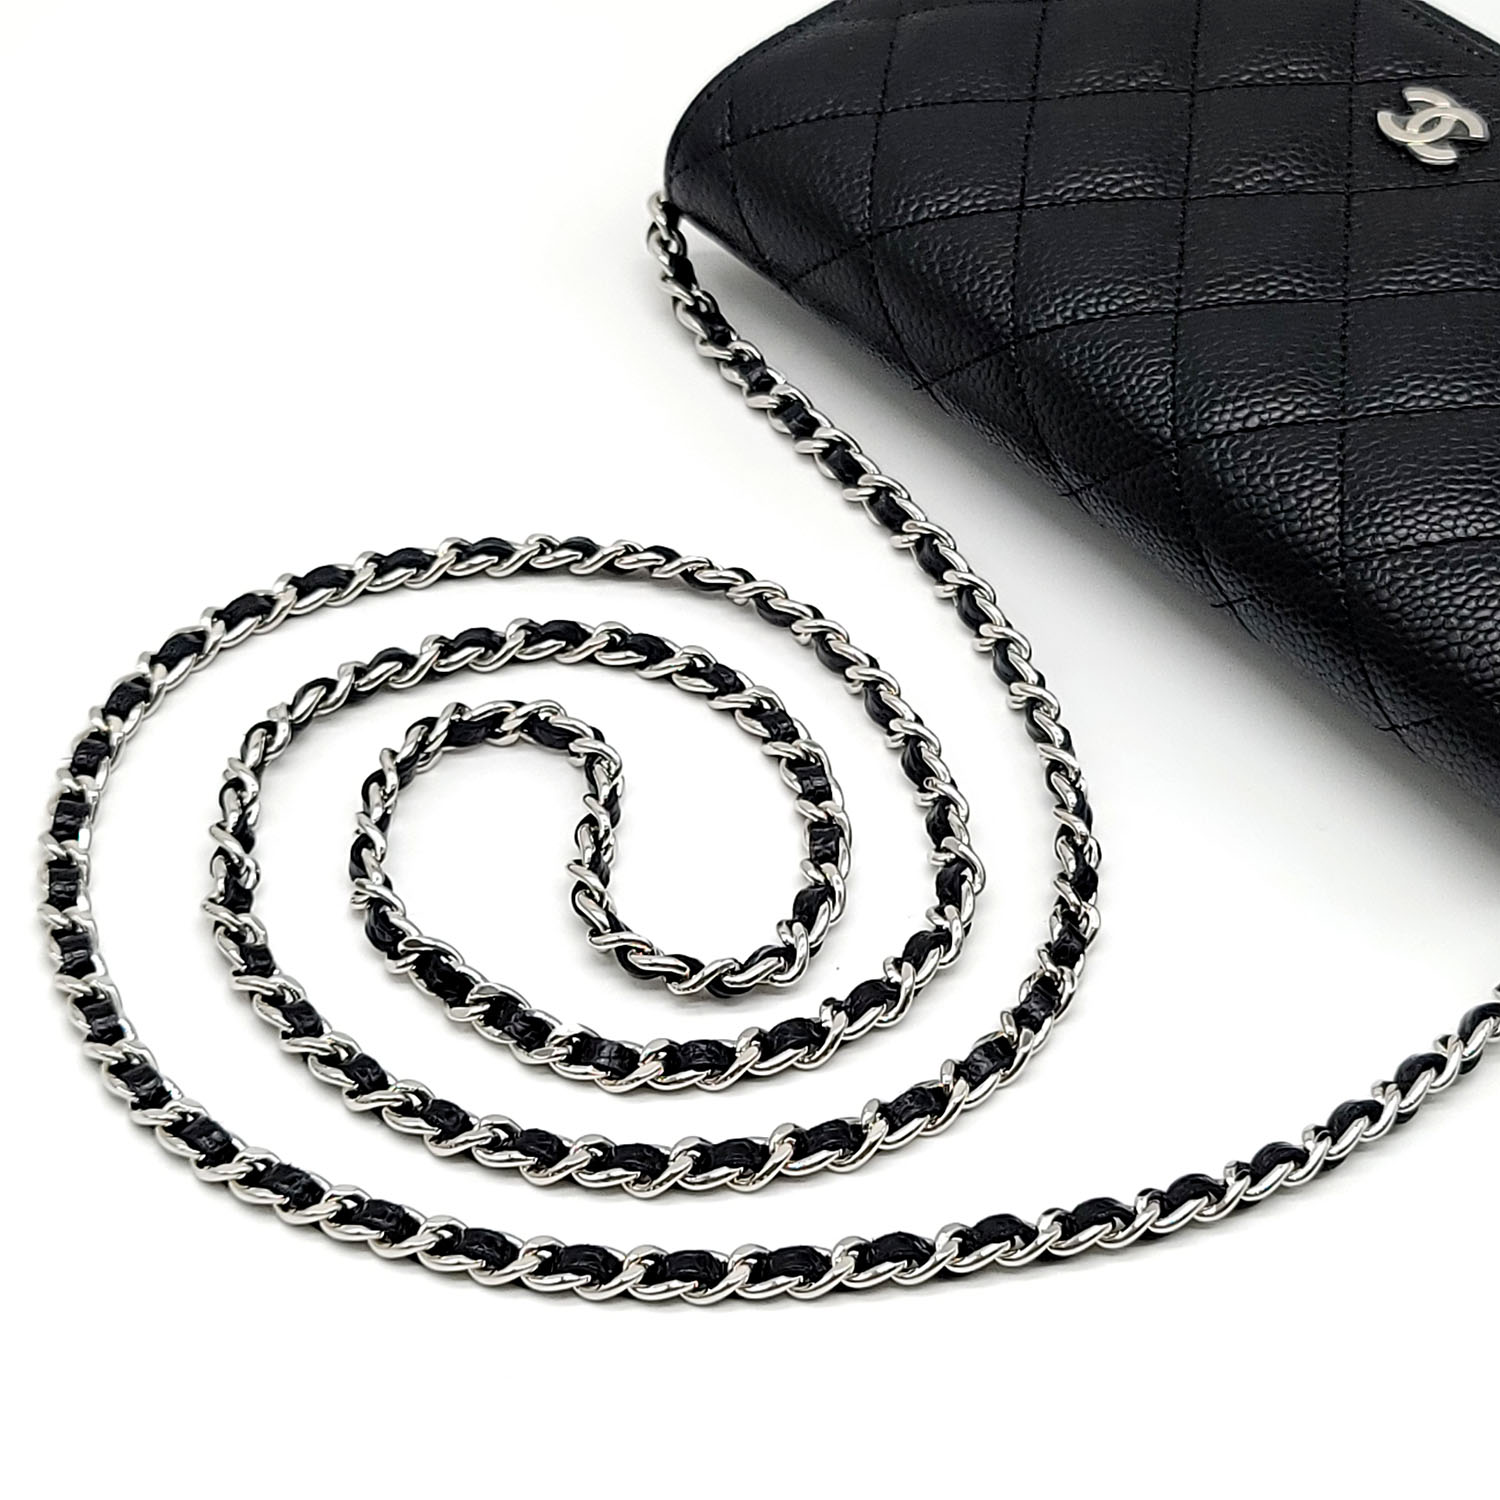 Chanel Classic Wallet On Chain Black Quilted Caviar